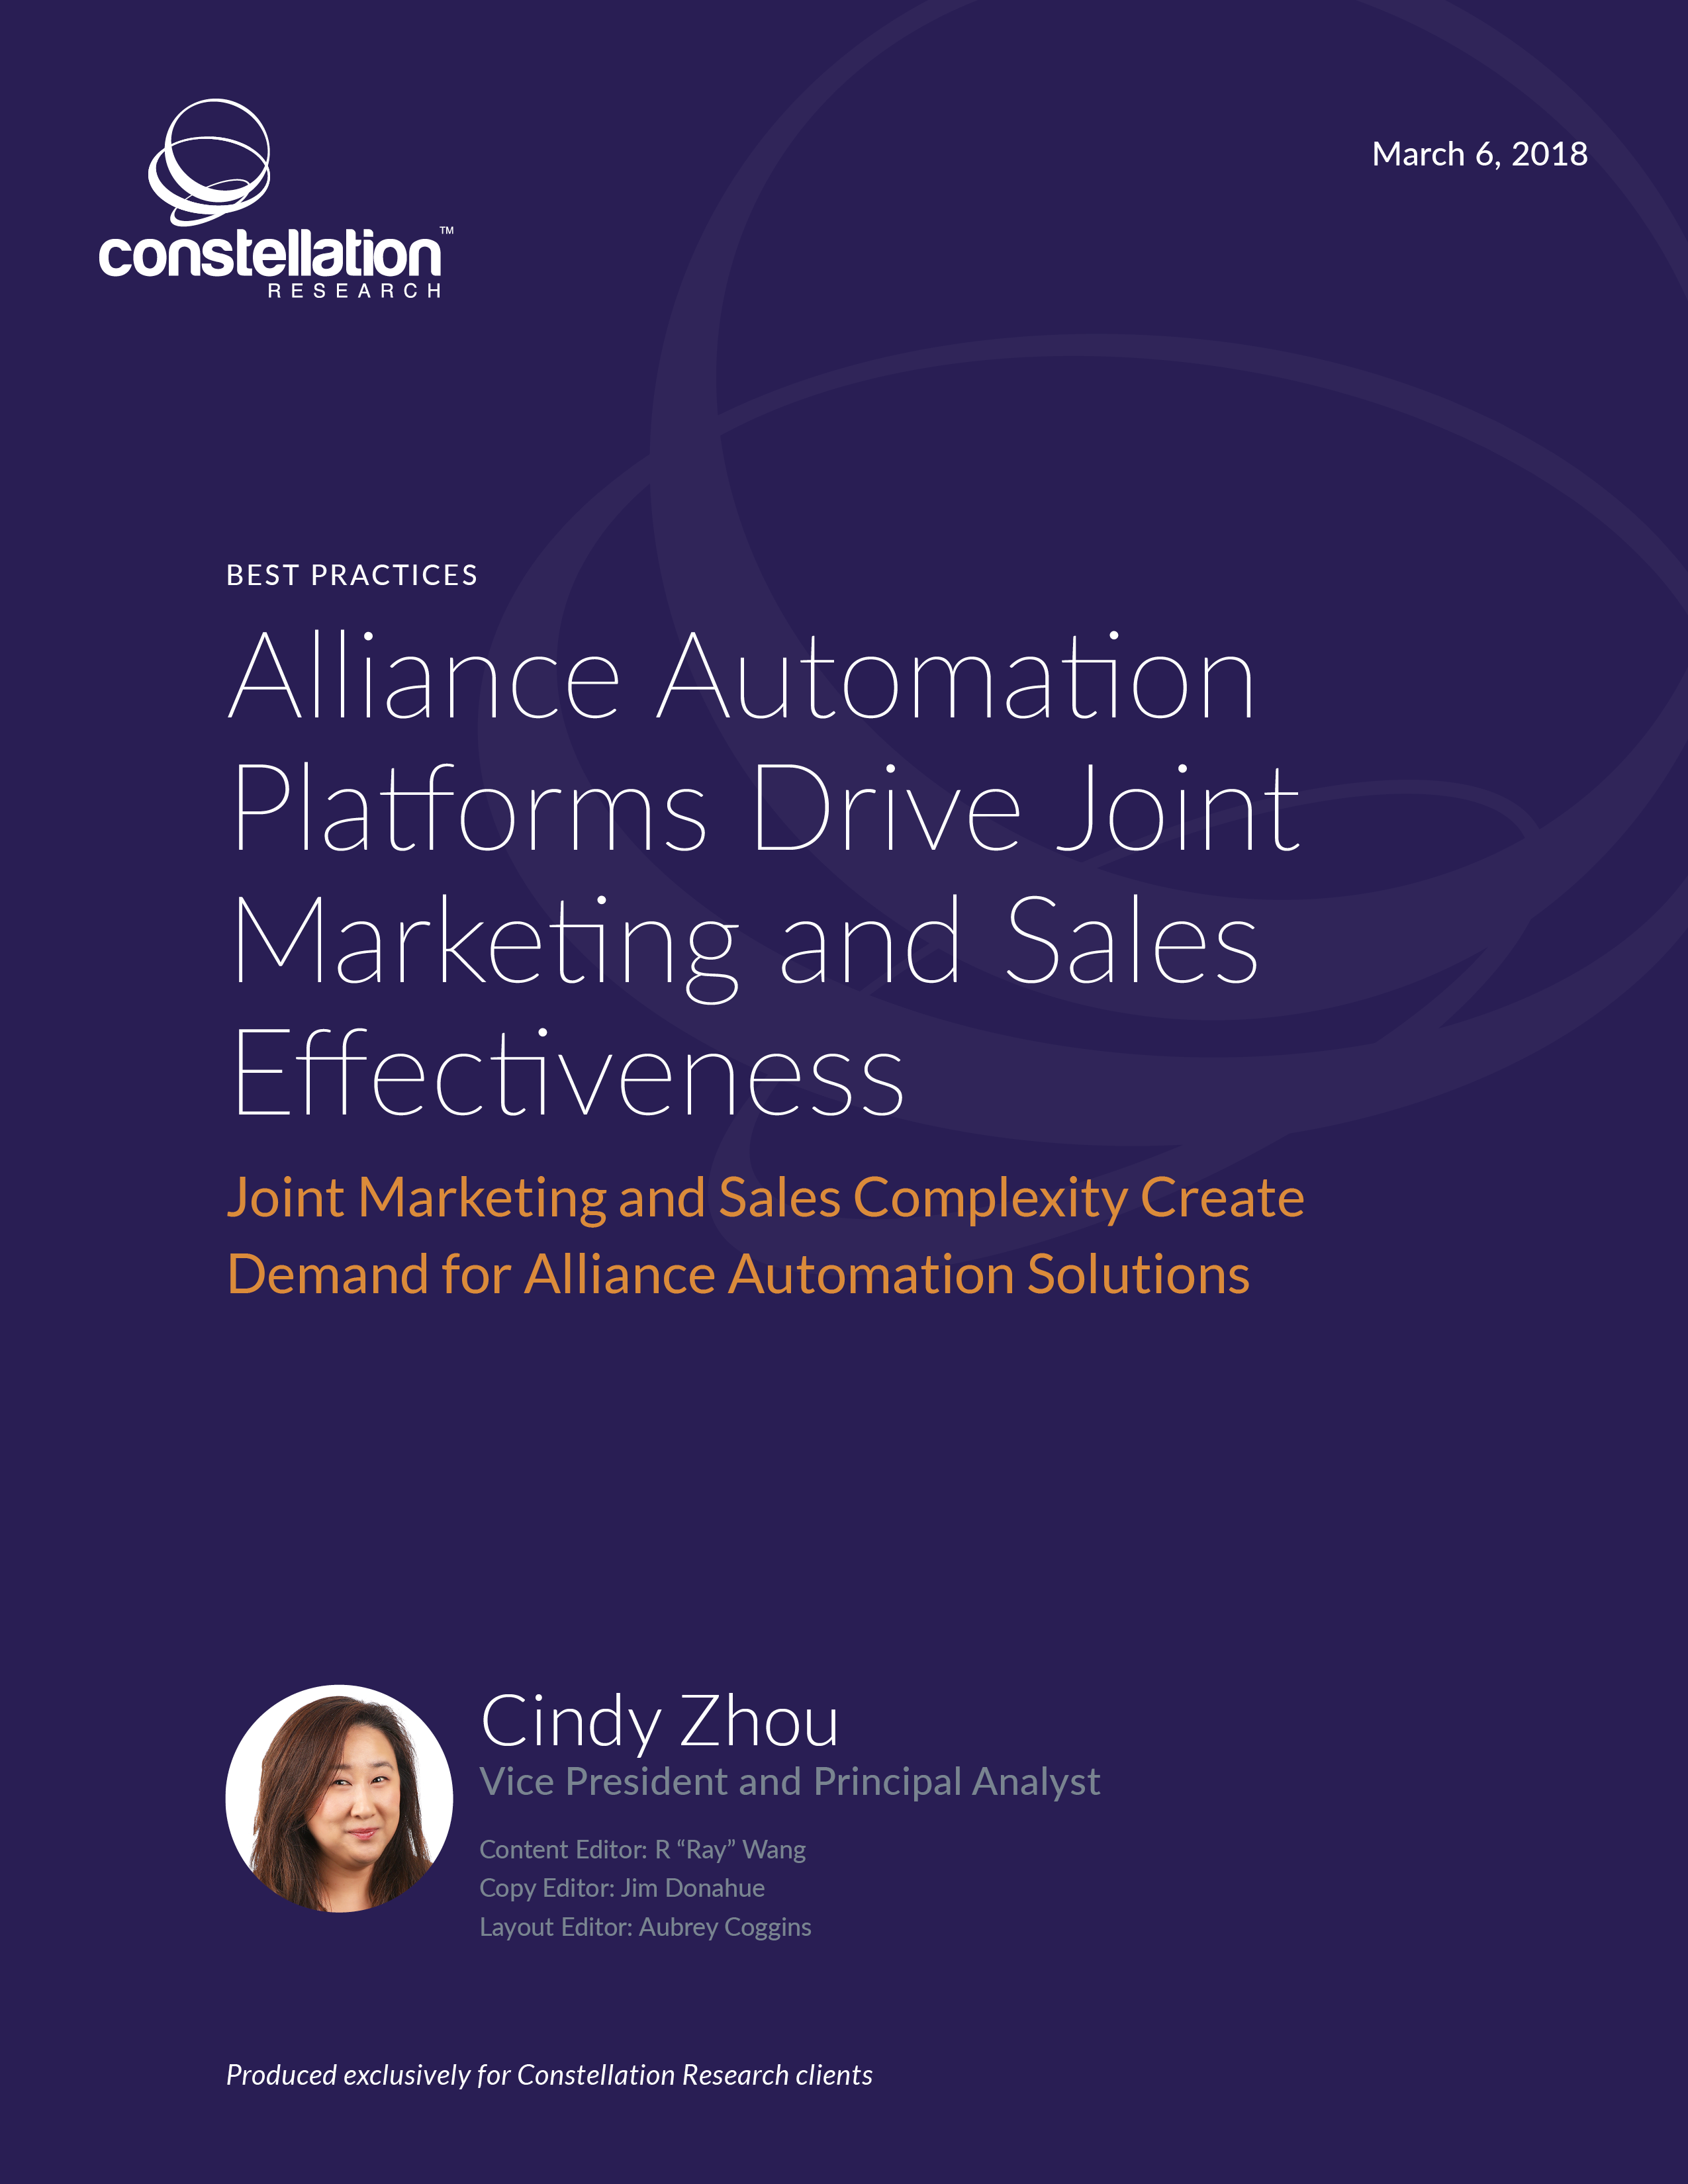 Alliance Automation Platforms Drive Joint Marketing and Sales Effectiveness